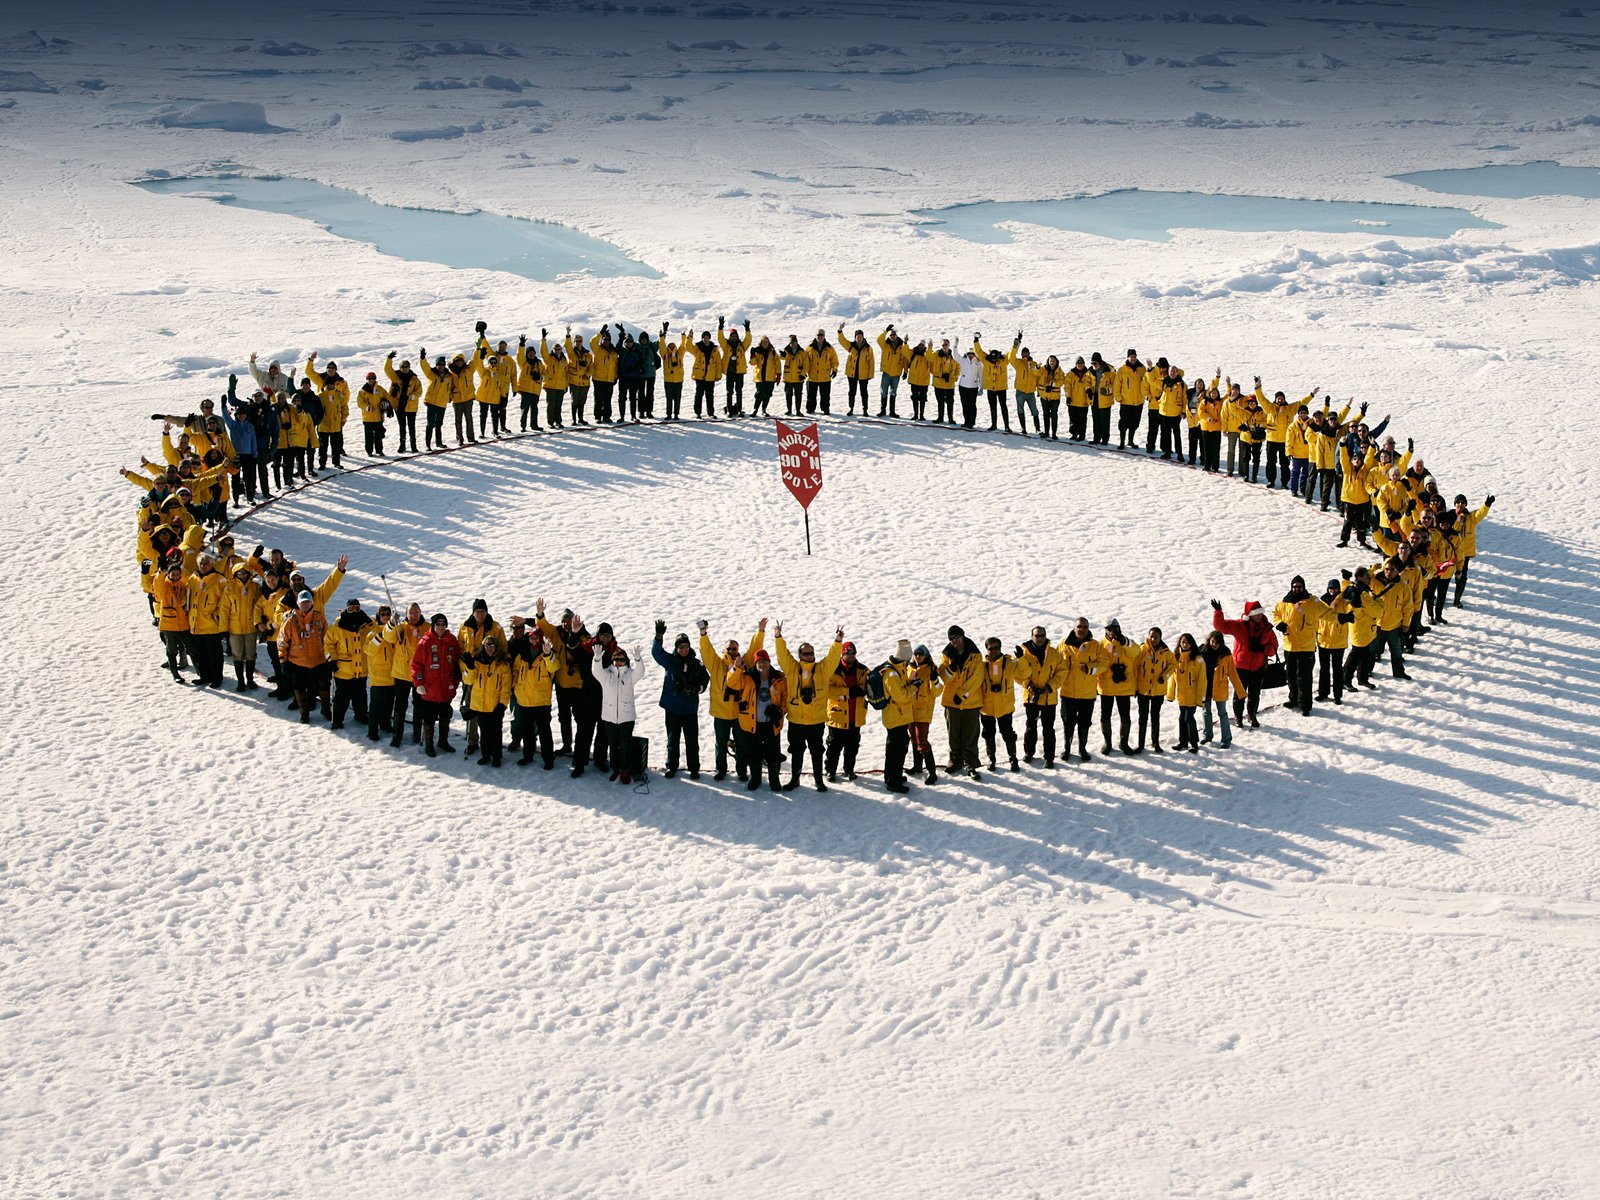 Passengers gather on the sea ice to celebrate the feat of reaching the North Pole by small expedition ship. Photo: John Weller